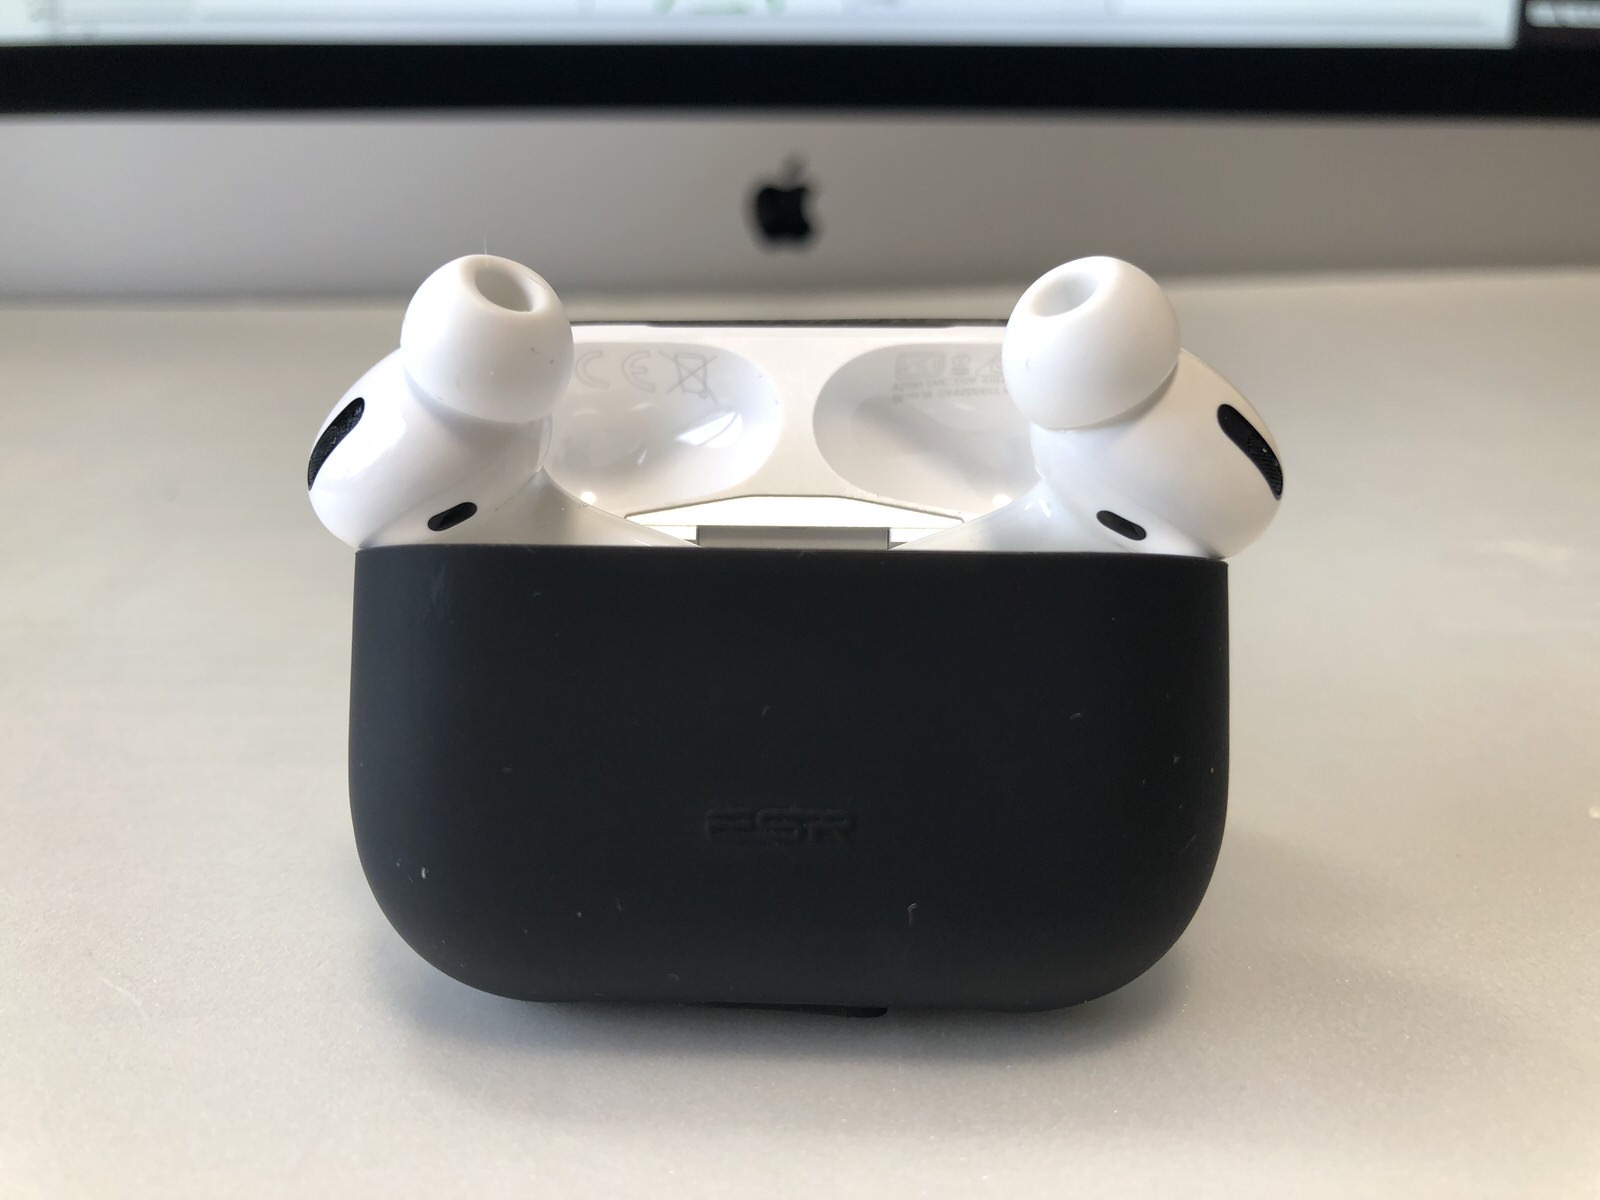 AirPods Pro−2